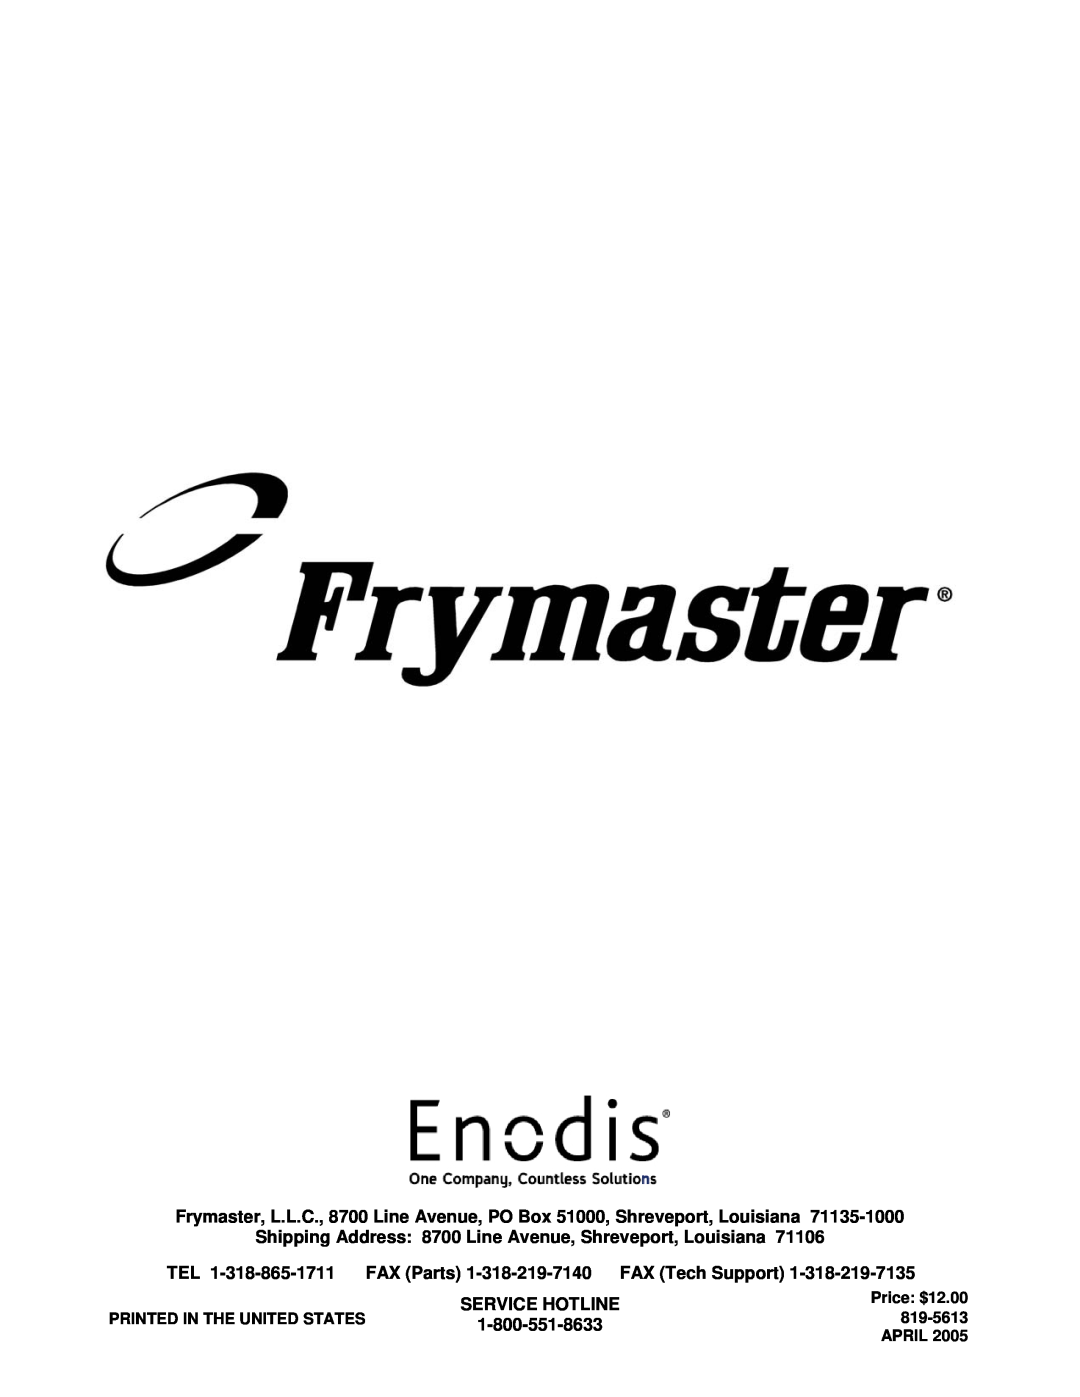 Frymaster CF Series Shipping Address 8700 Line Avenue, Shreveport, Louisiana, FAX Parts 1-318-219-7140 FAX Tech Support 